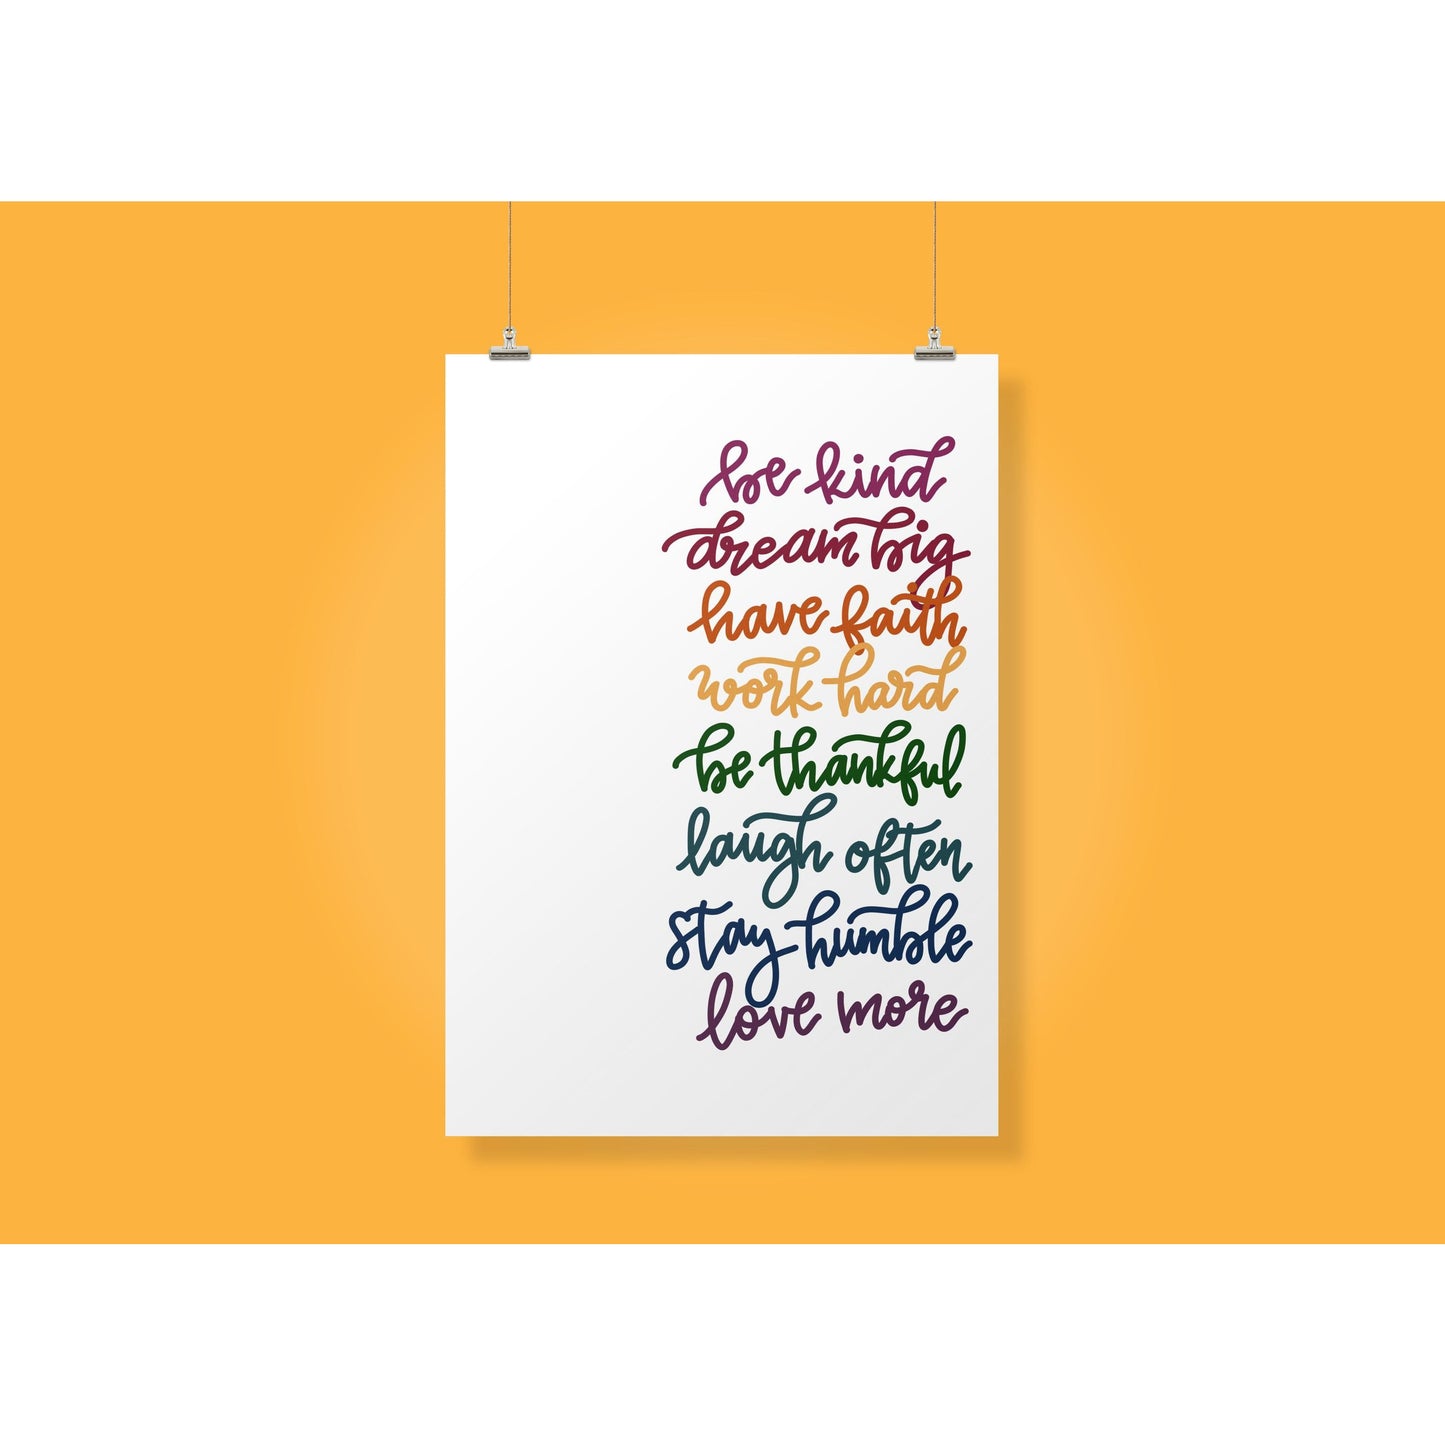 Words to Live By - Print - Wall Art - 8x10